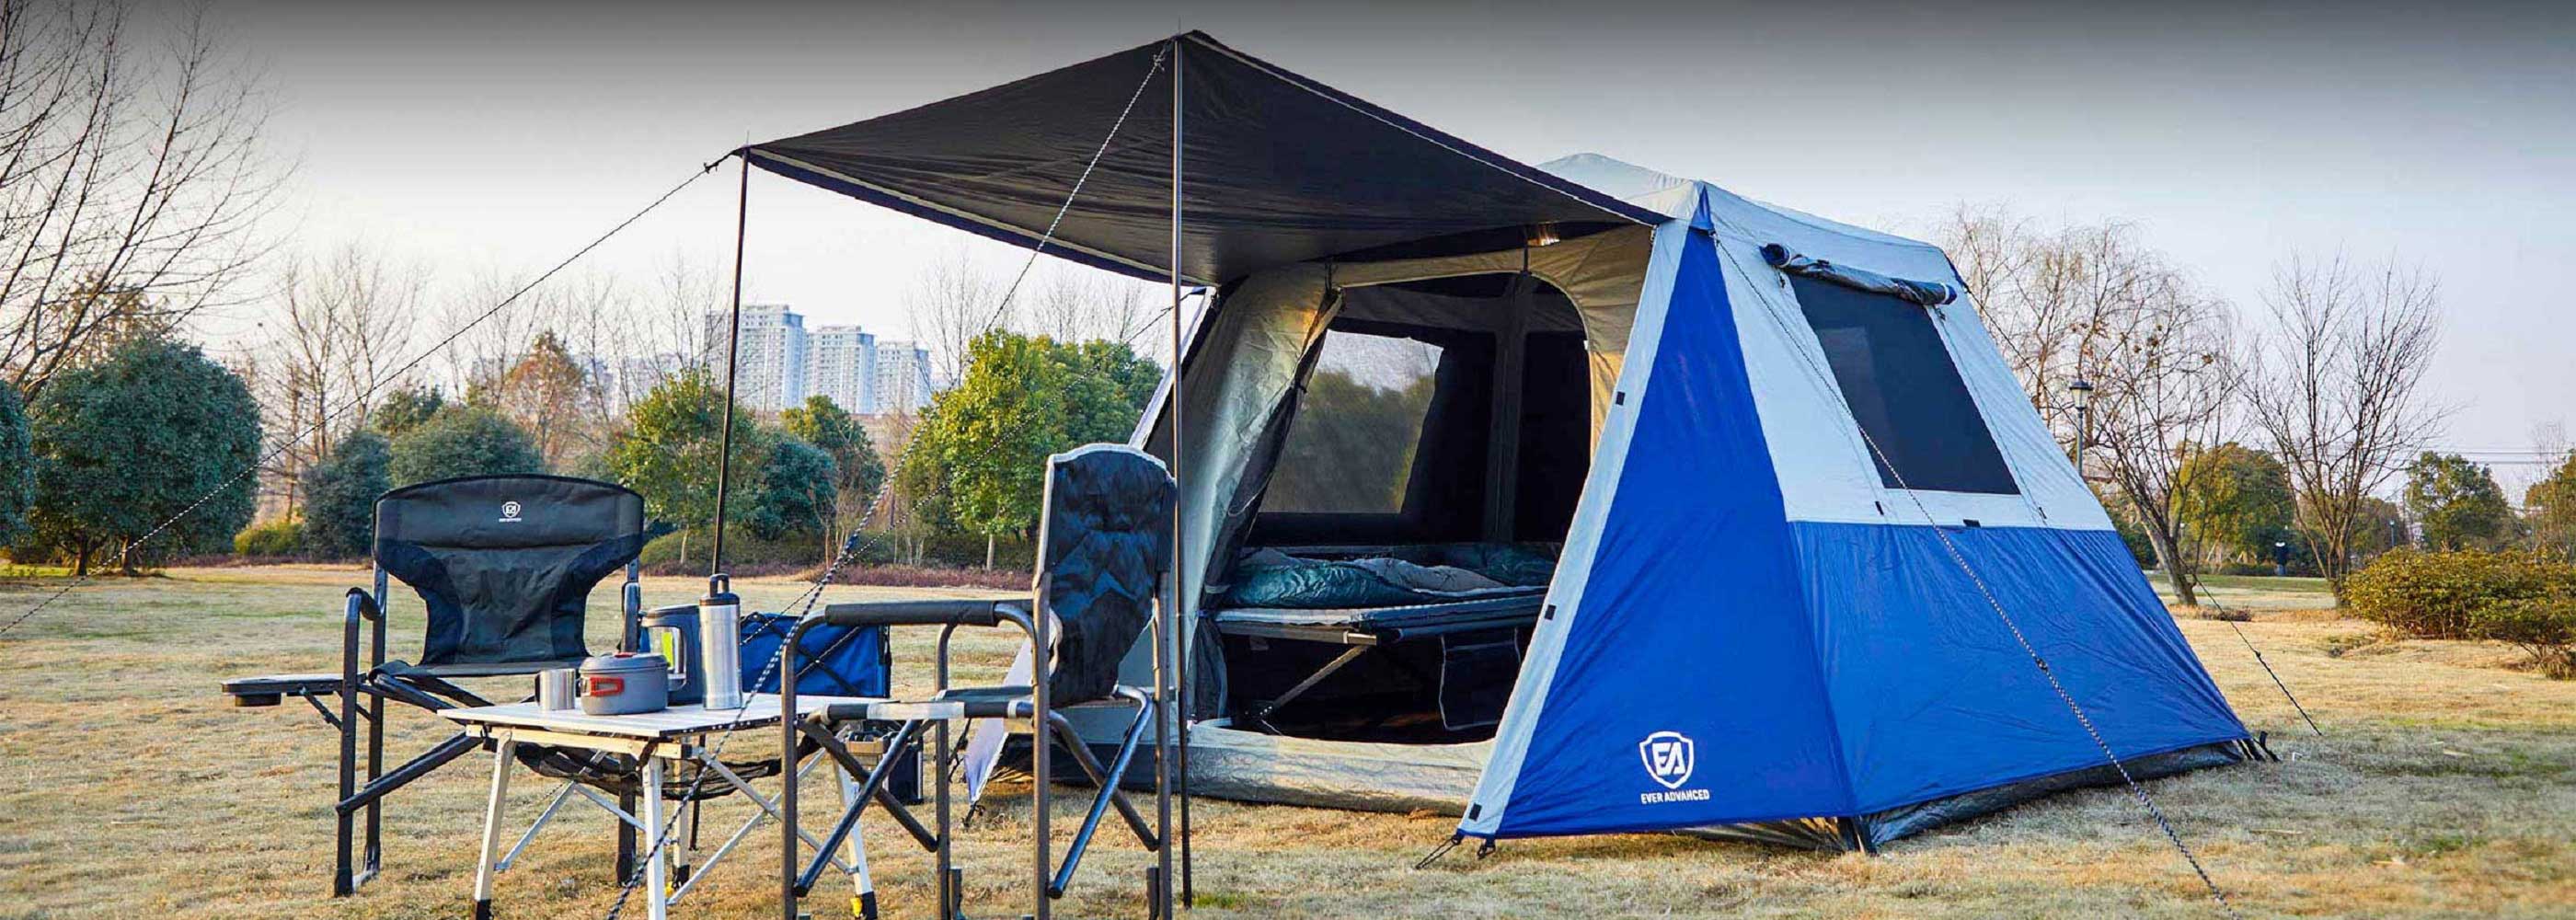 Ever Advanced blackout camping tent